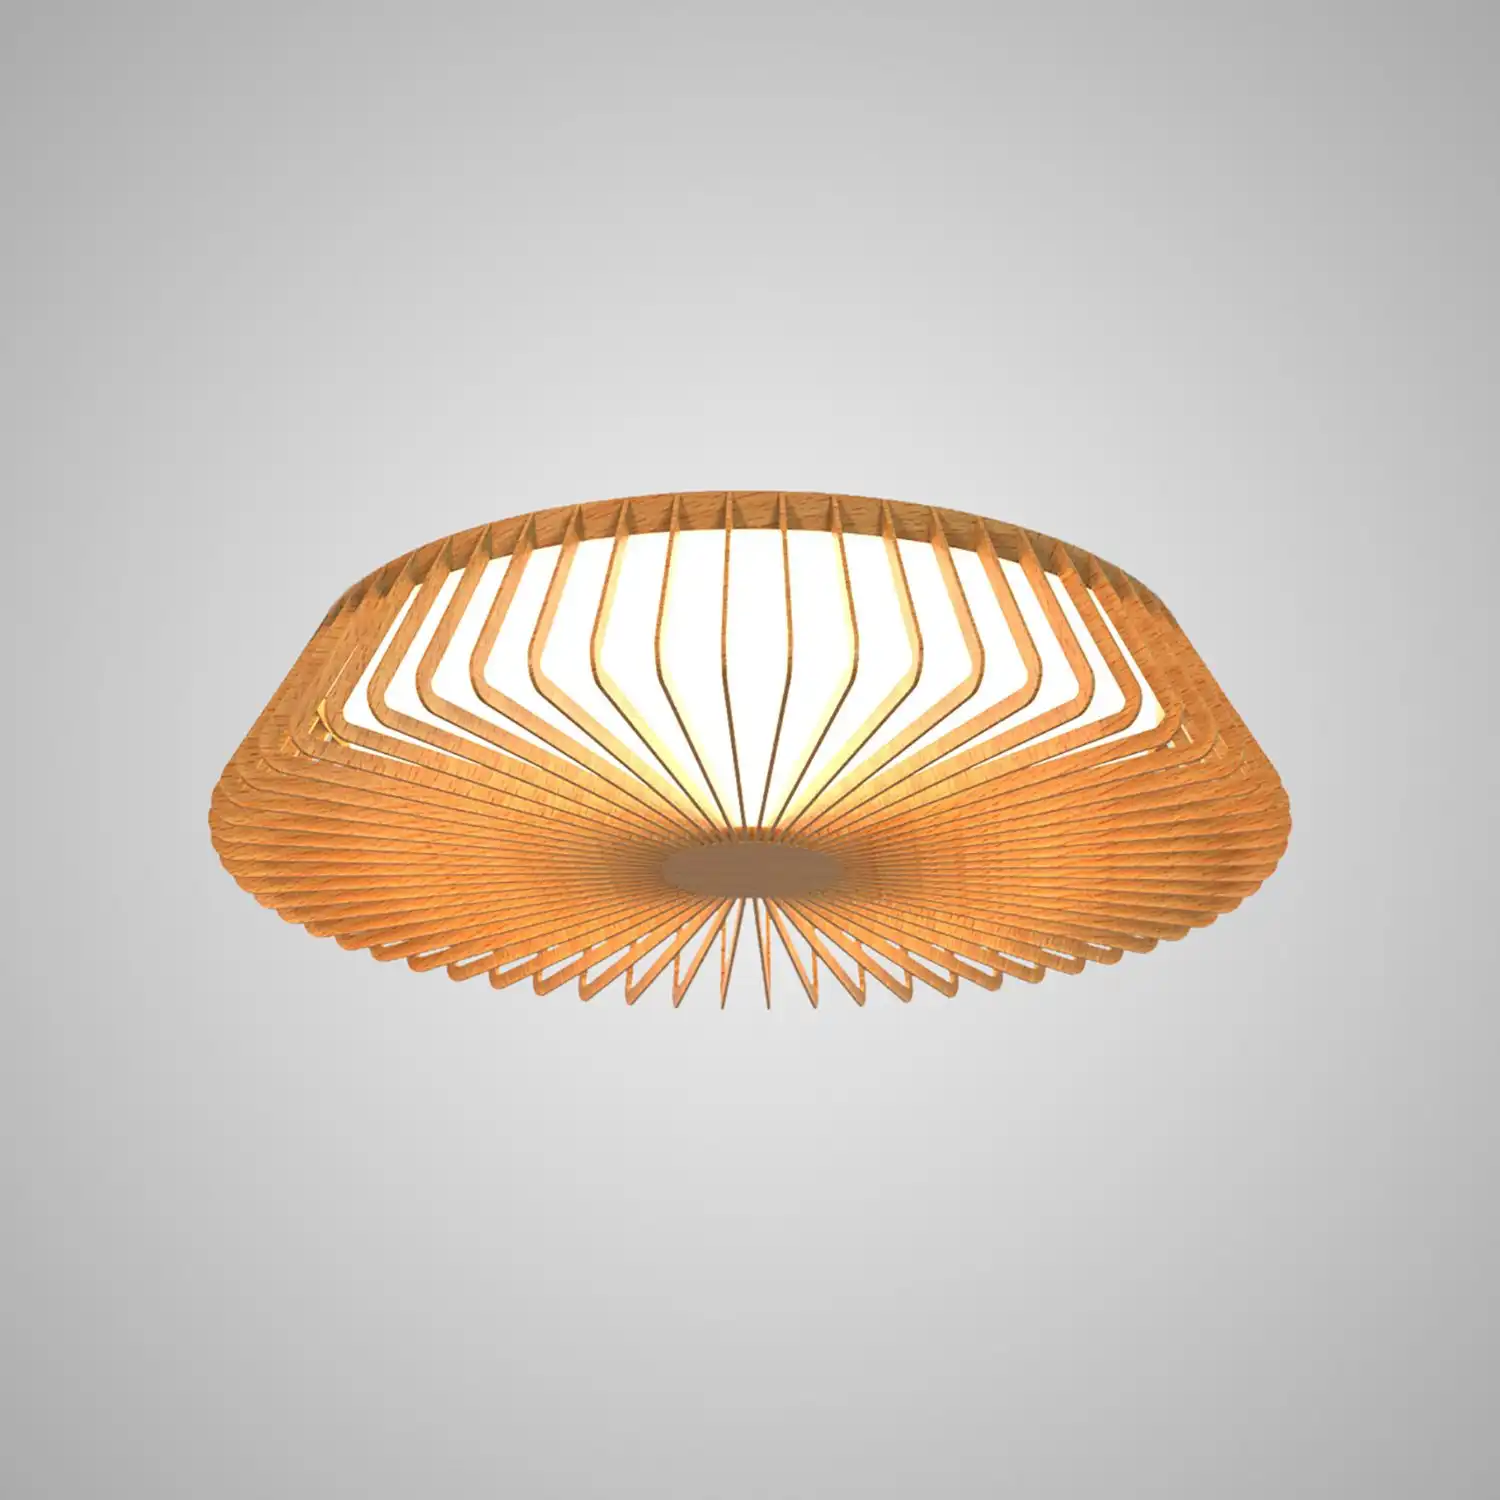 Himalaya 53cm Round Ceiling (Light Only), 56W LED, 2700 5000K Tuneable White, 2500lm, Remote Control, Wood, 3yrs Warranty